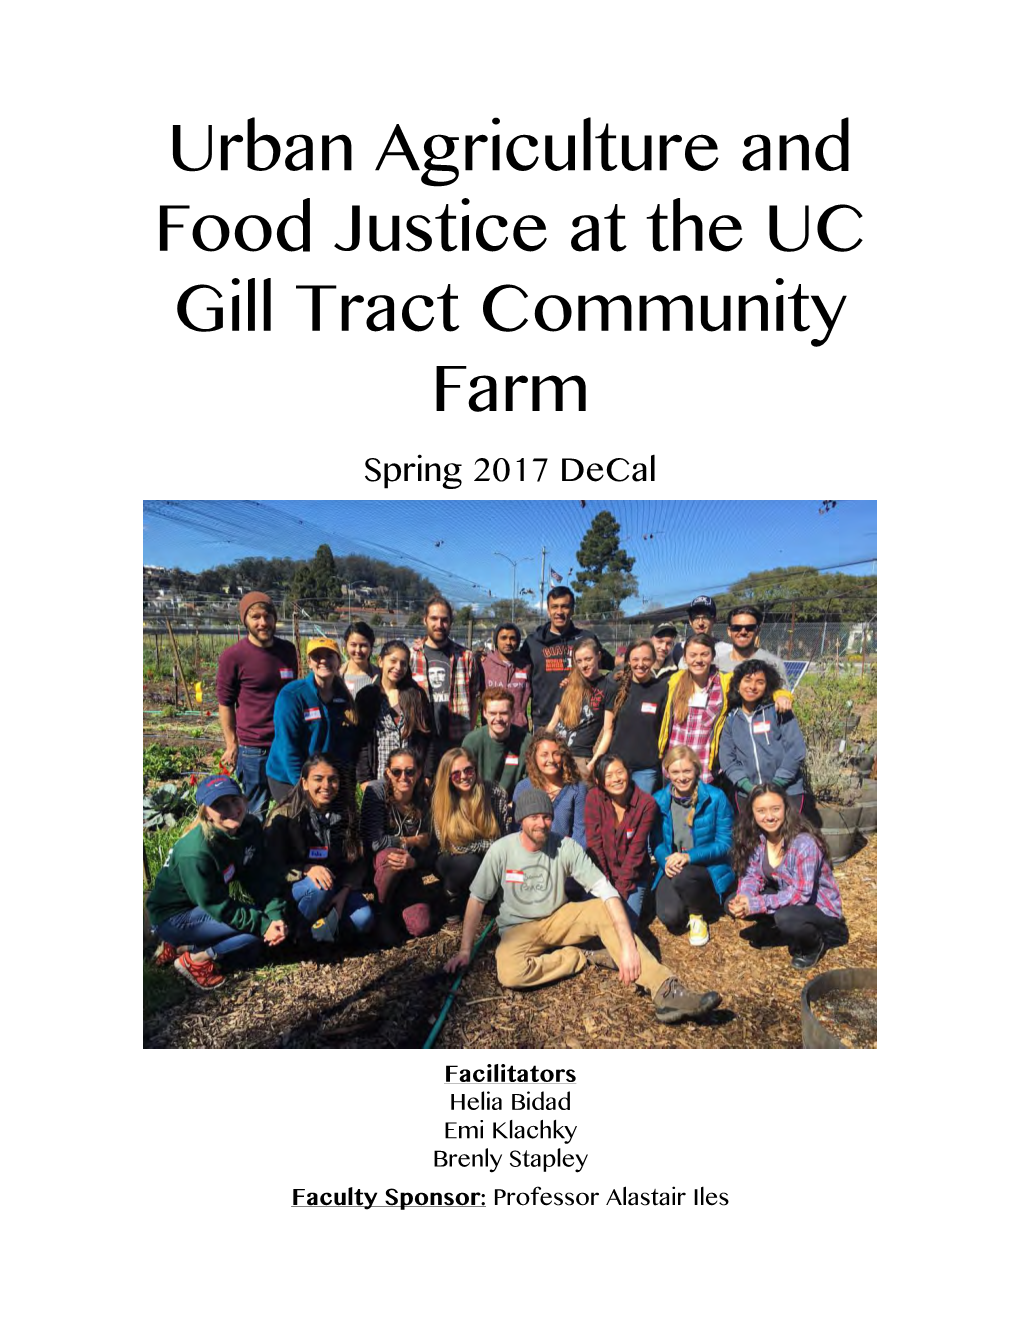 Urban Agriculture and Food Justice at the UC Gill Tract Community Farm